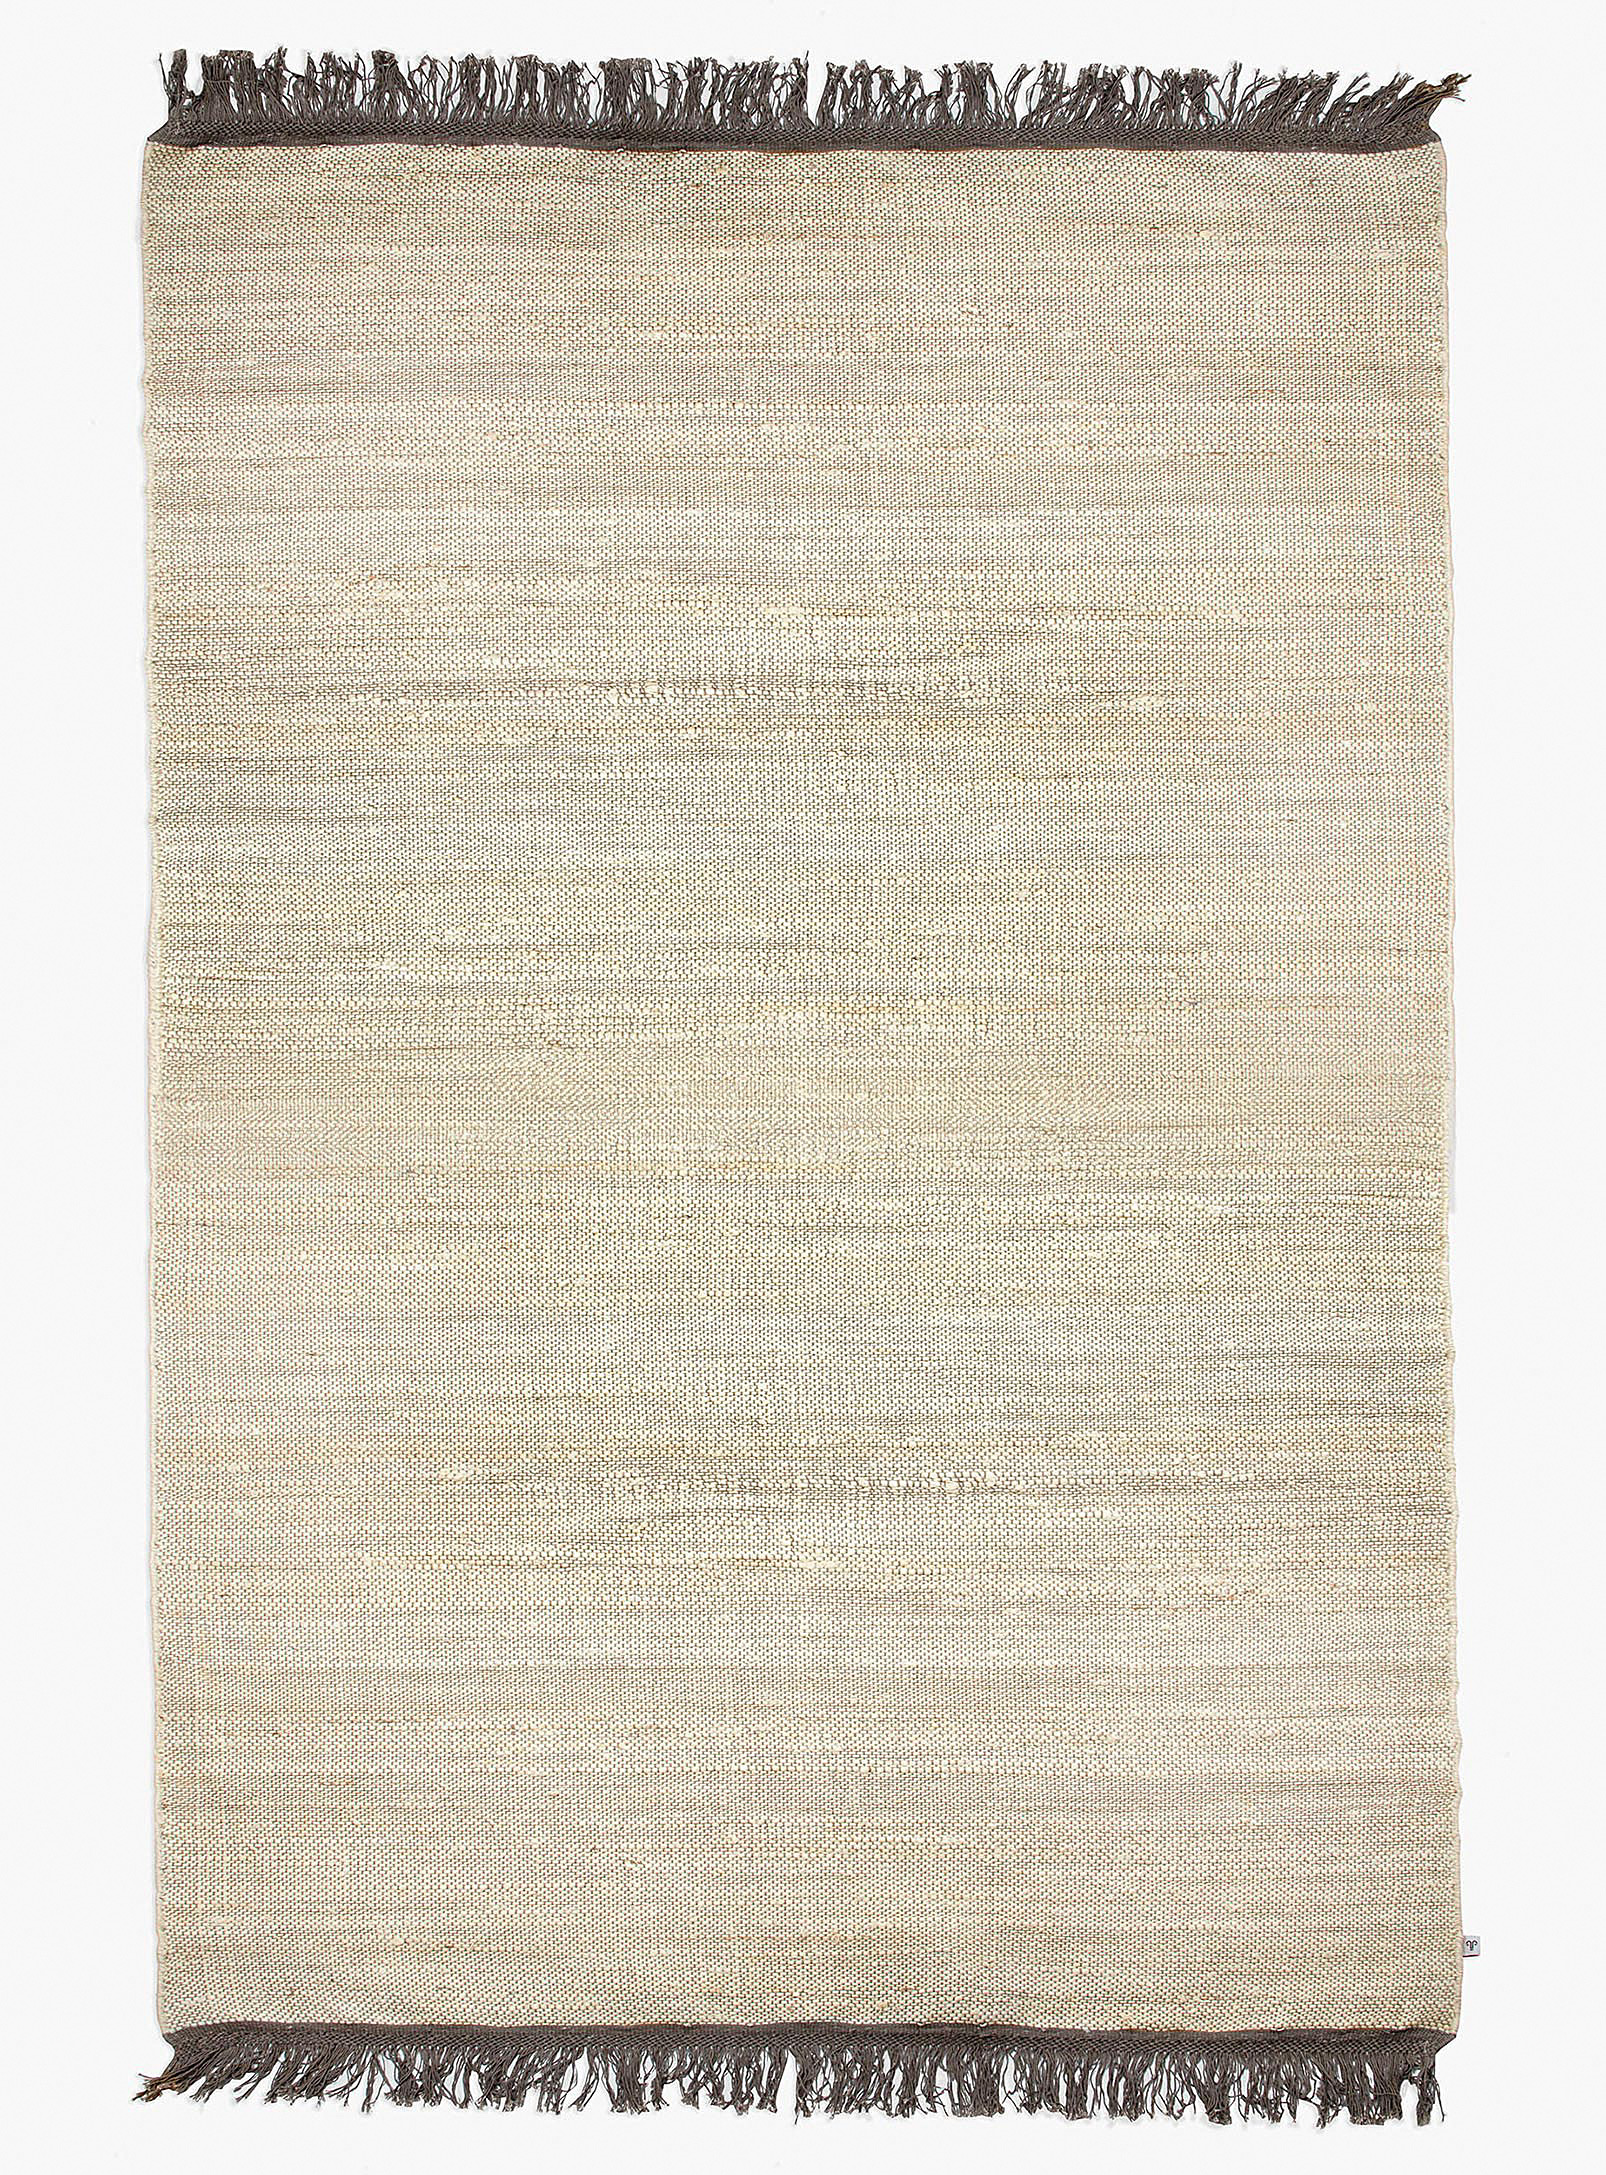 Mark Krebs Textured Neutral Rug See Available Sizes In Cream Beige